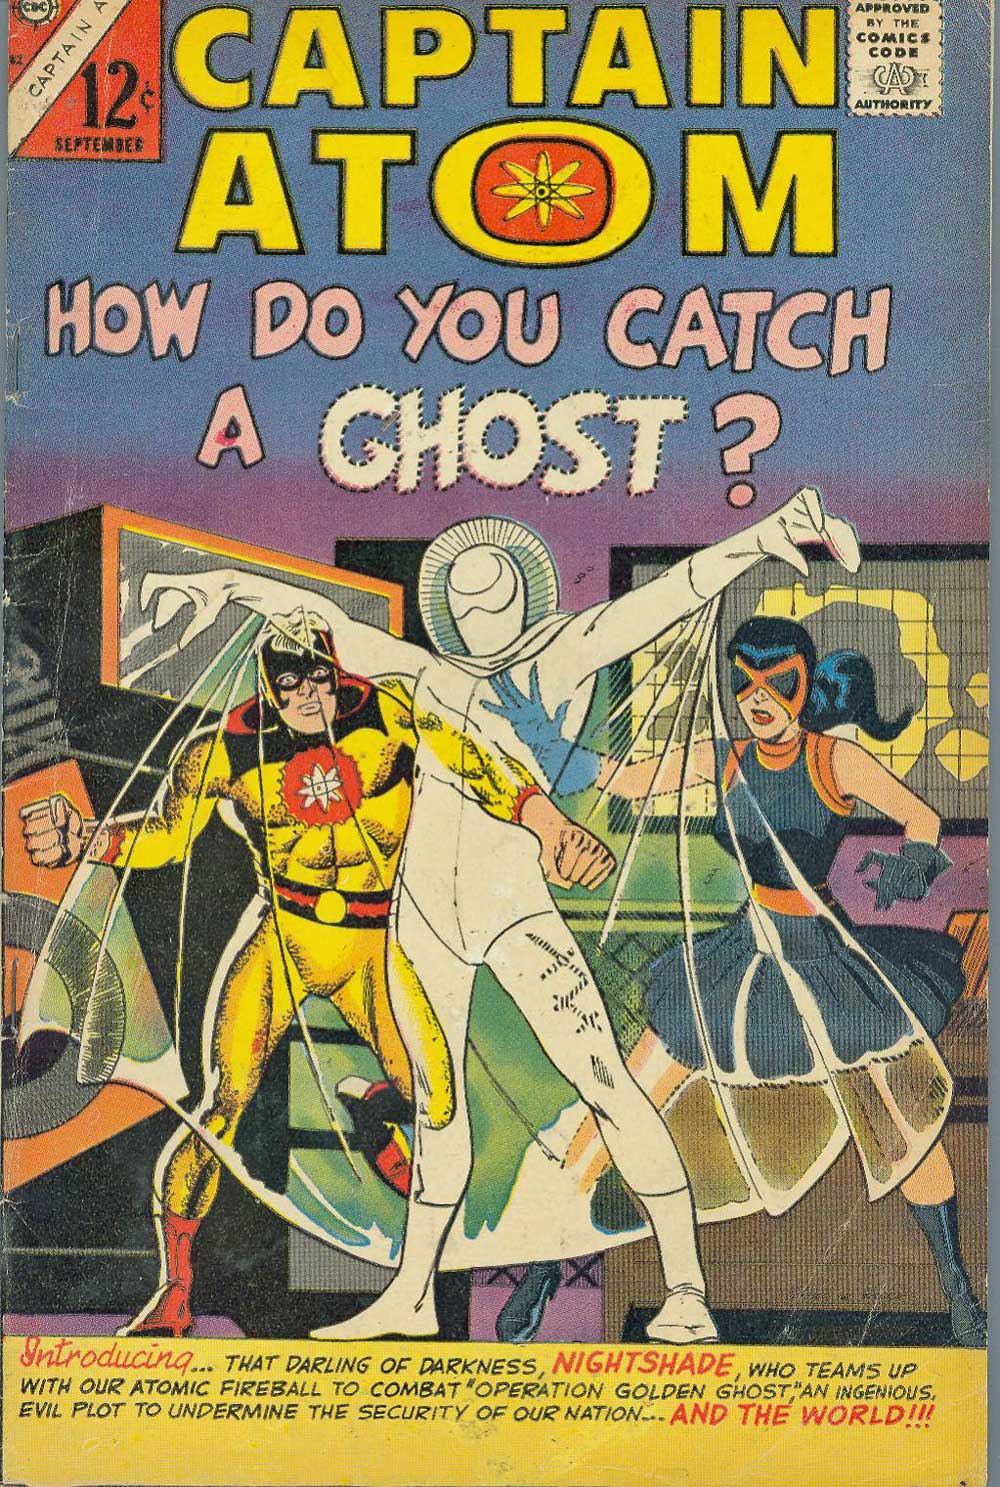 Nightshade's first appearance in Captain Atom #82 (1966) from Charlton Comics